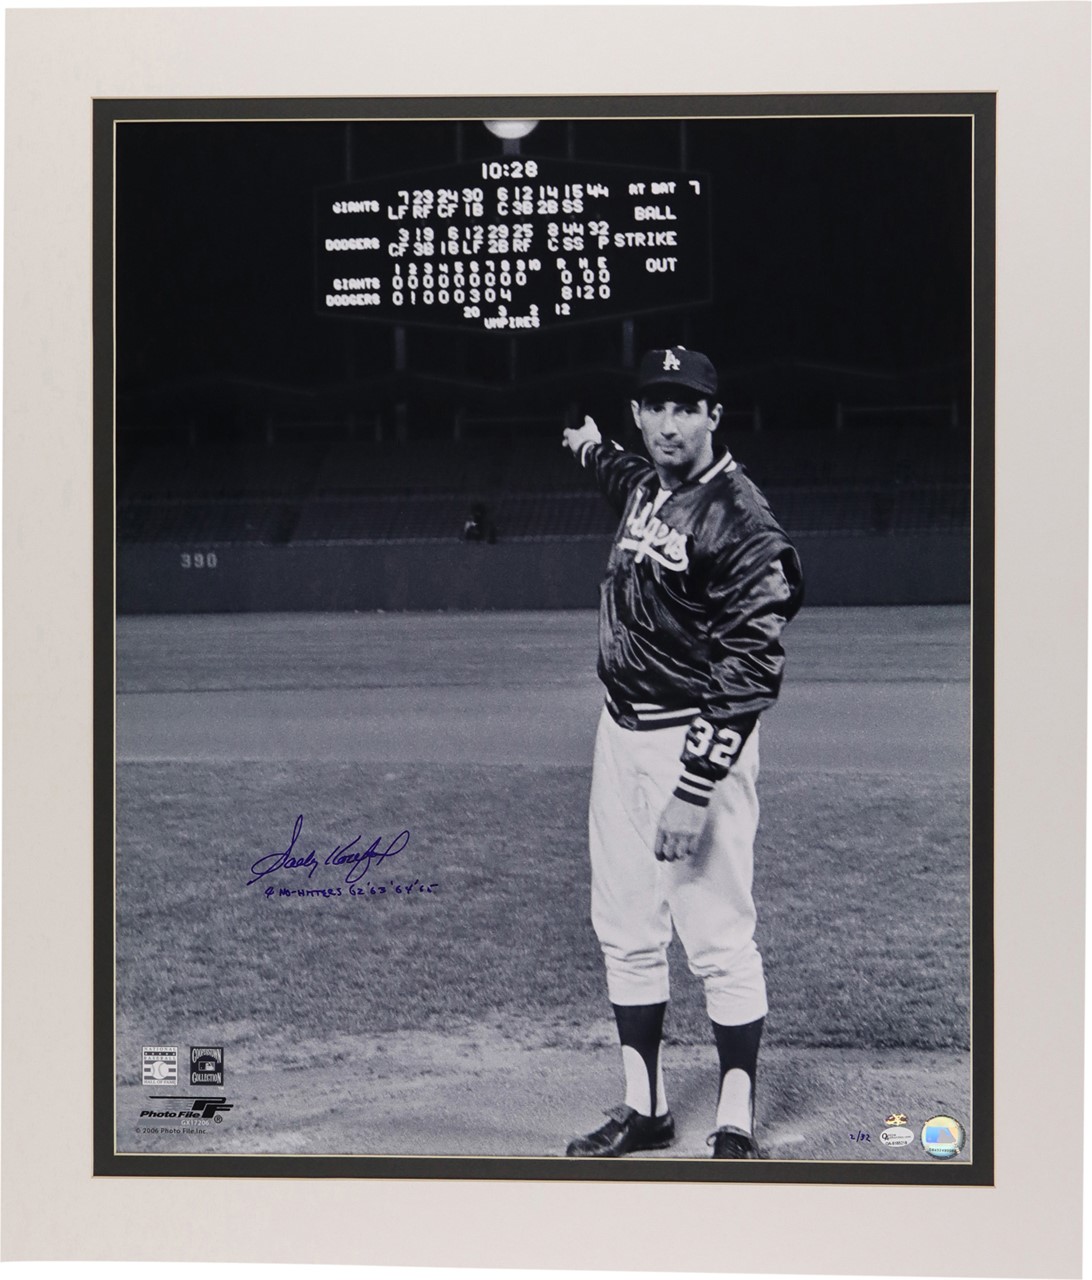 - Sandy Koufax "4 No-Hitters 62, 63, 64, 65" Signed Oversize Limited Edition Photograph LE 2/32 (OA)